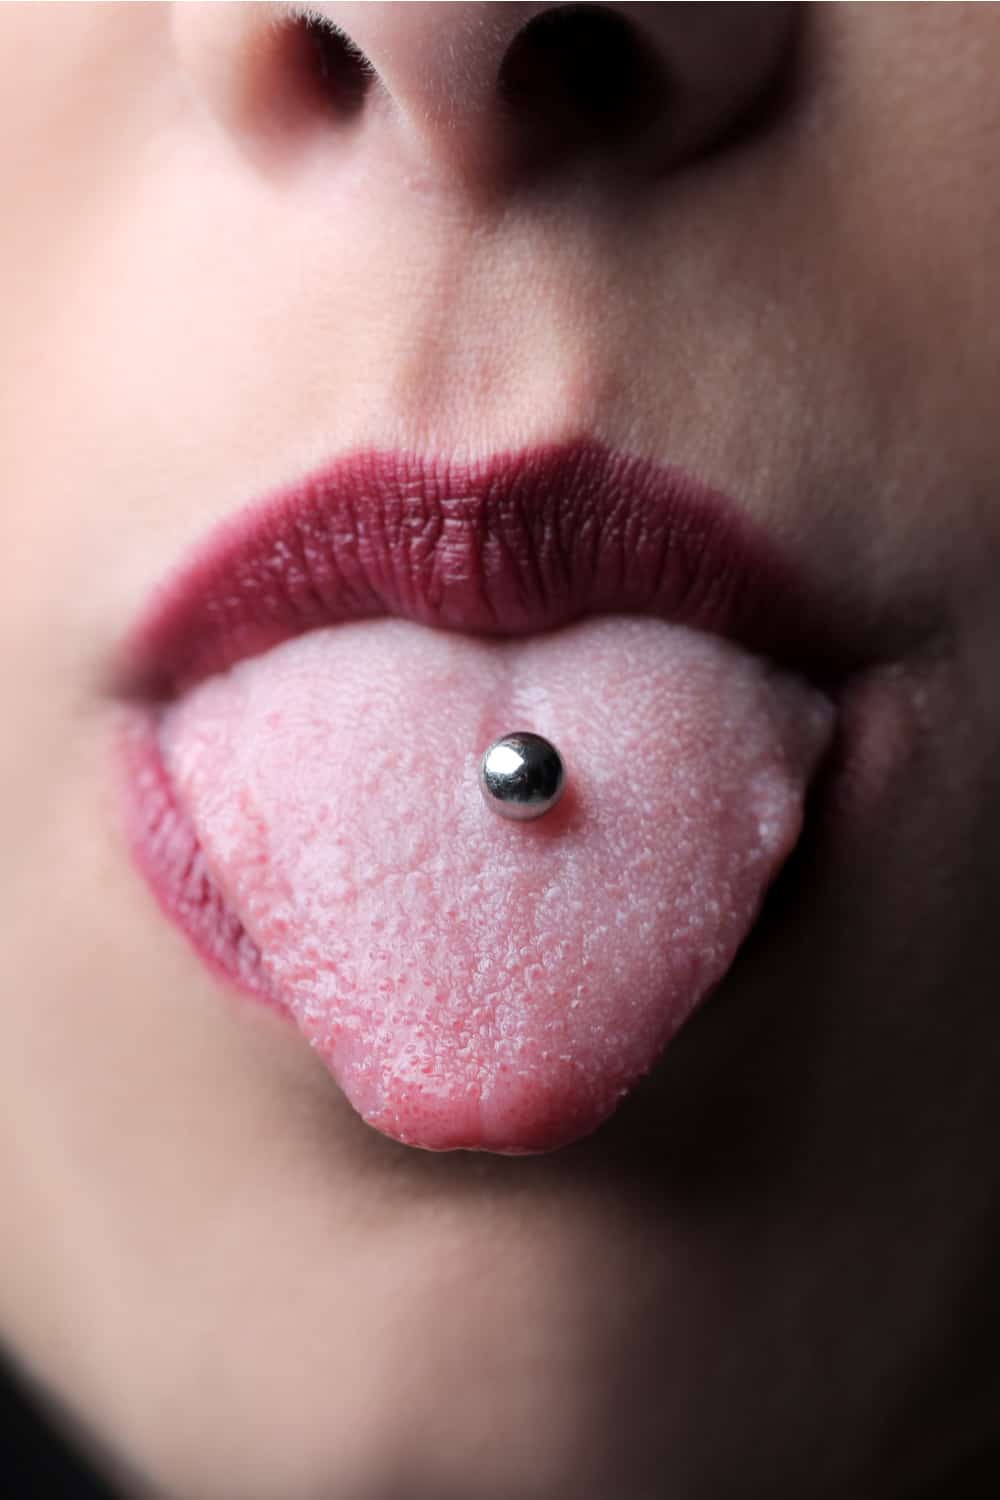 Types of Tongue Piercing